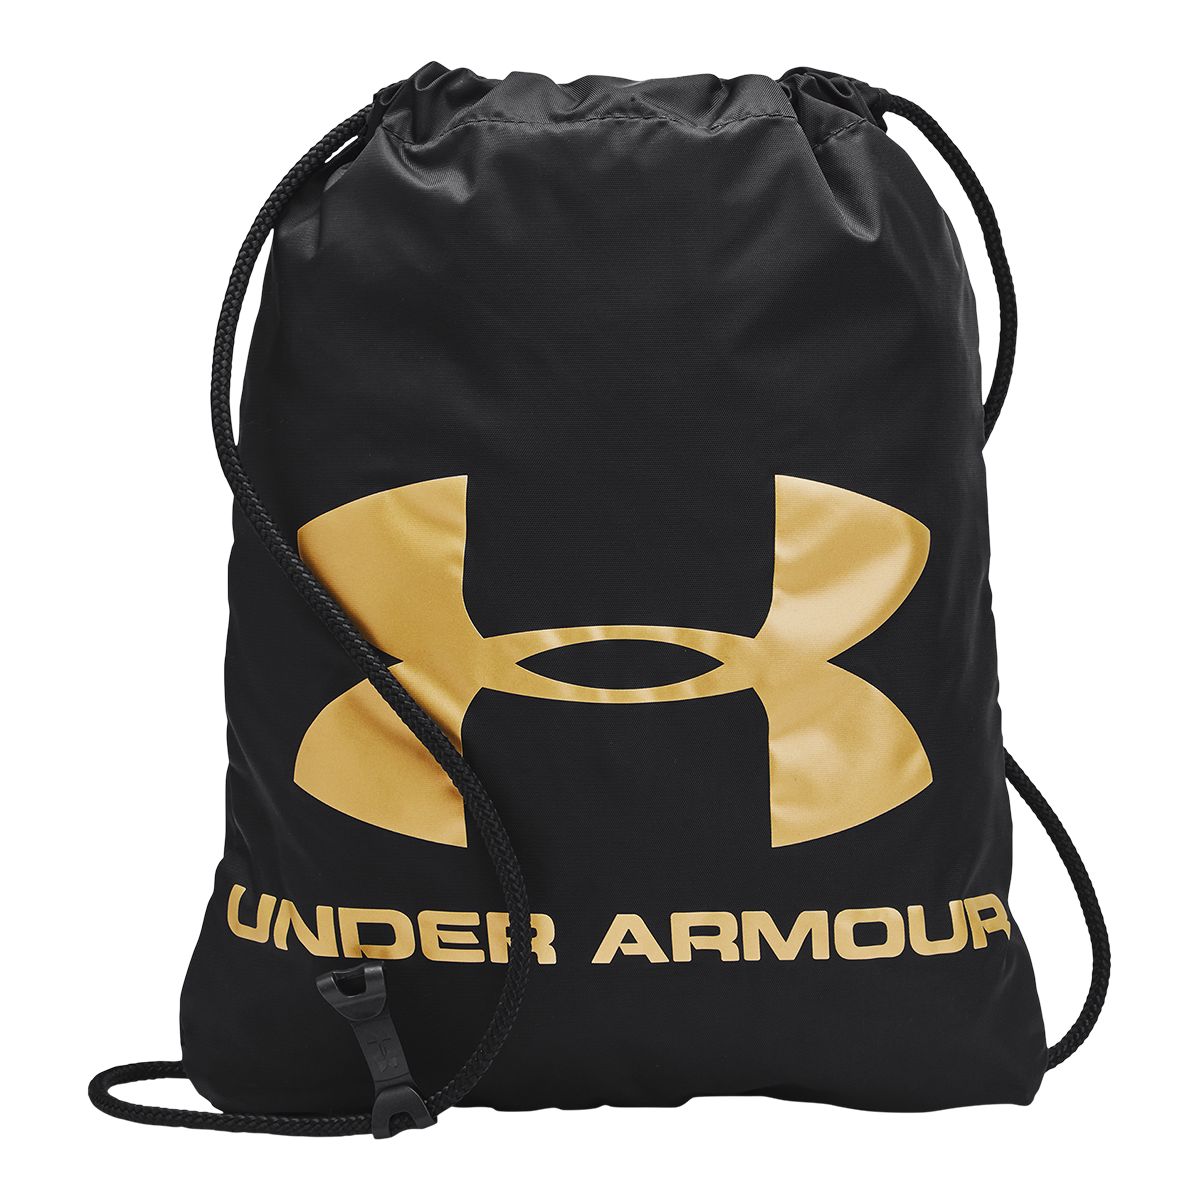 Under Armour Ozsee Sackpack  Push Promotional Products